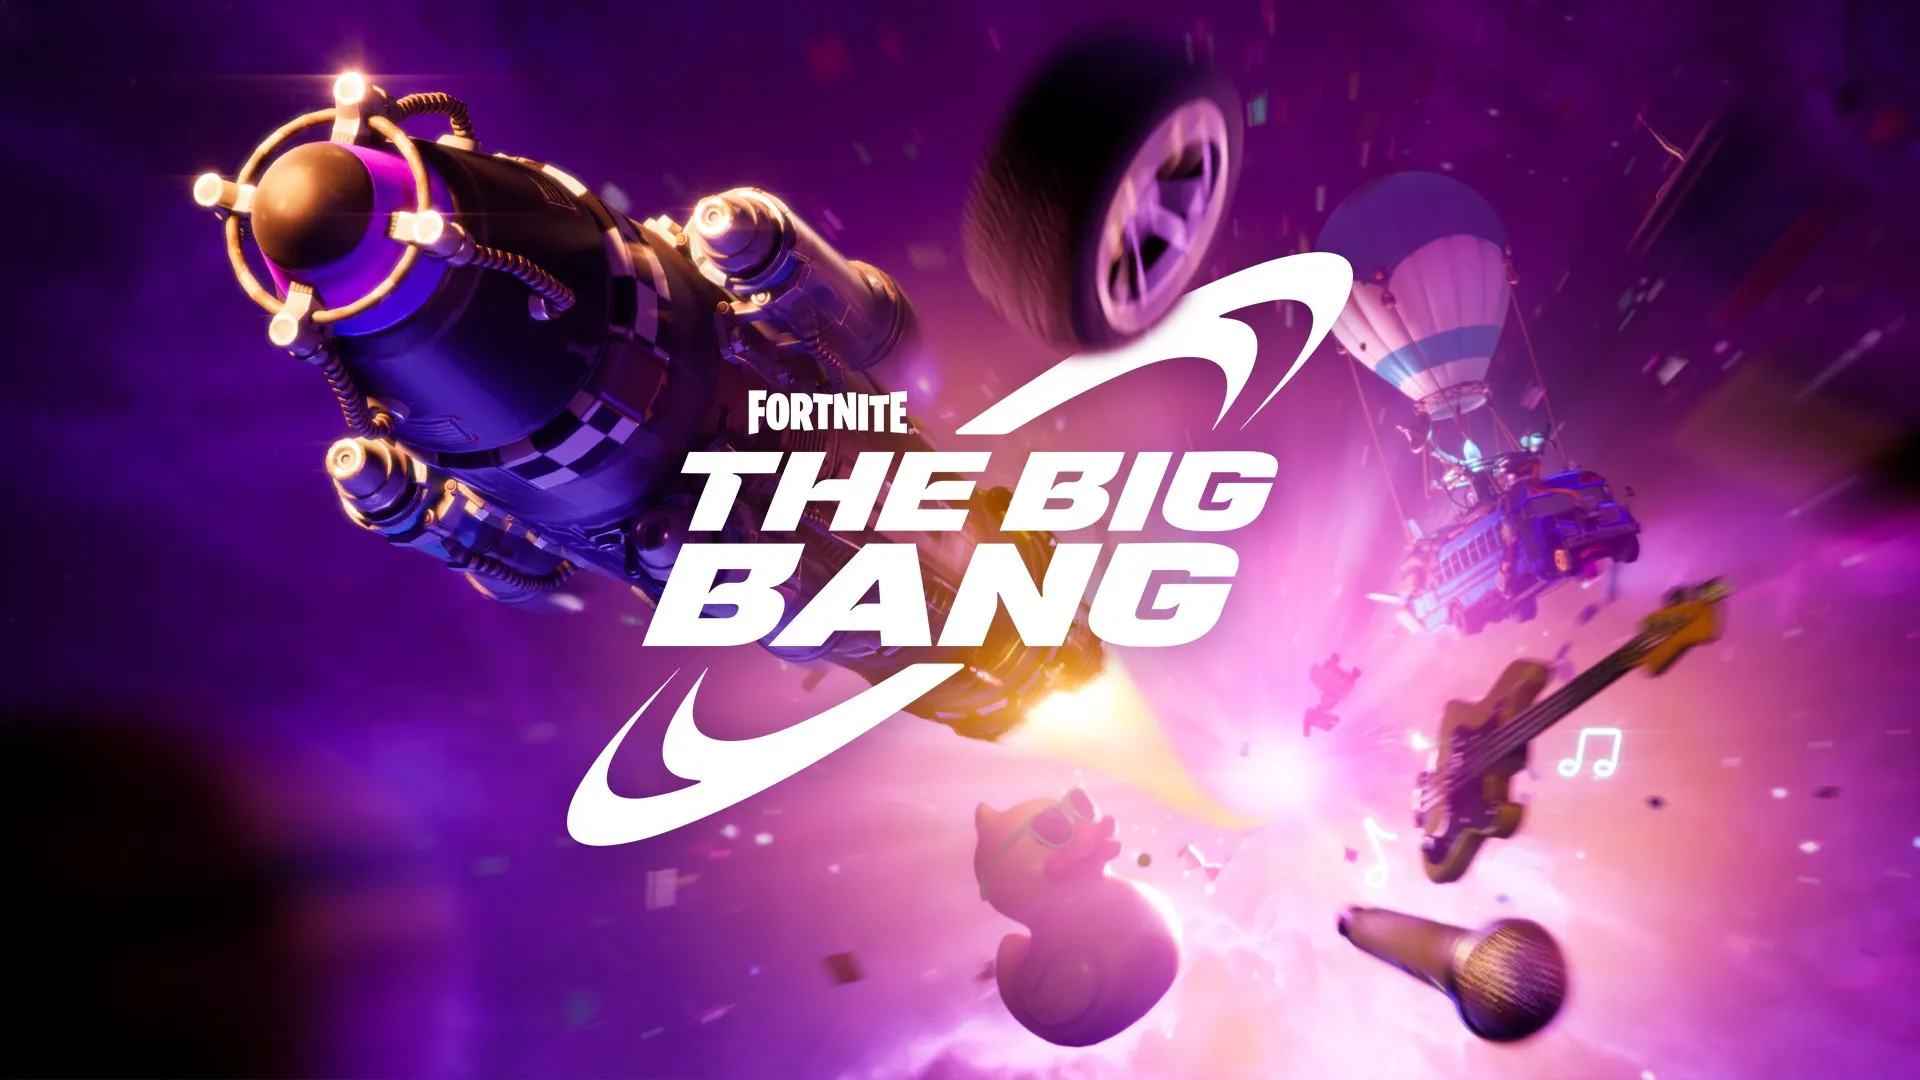 Fortnite's Big Bang event is coming. Image: Epic Games